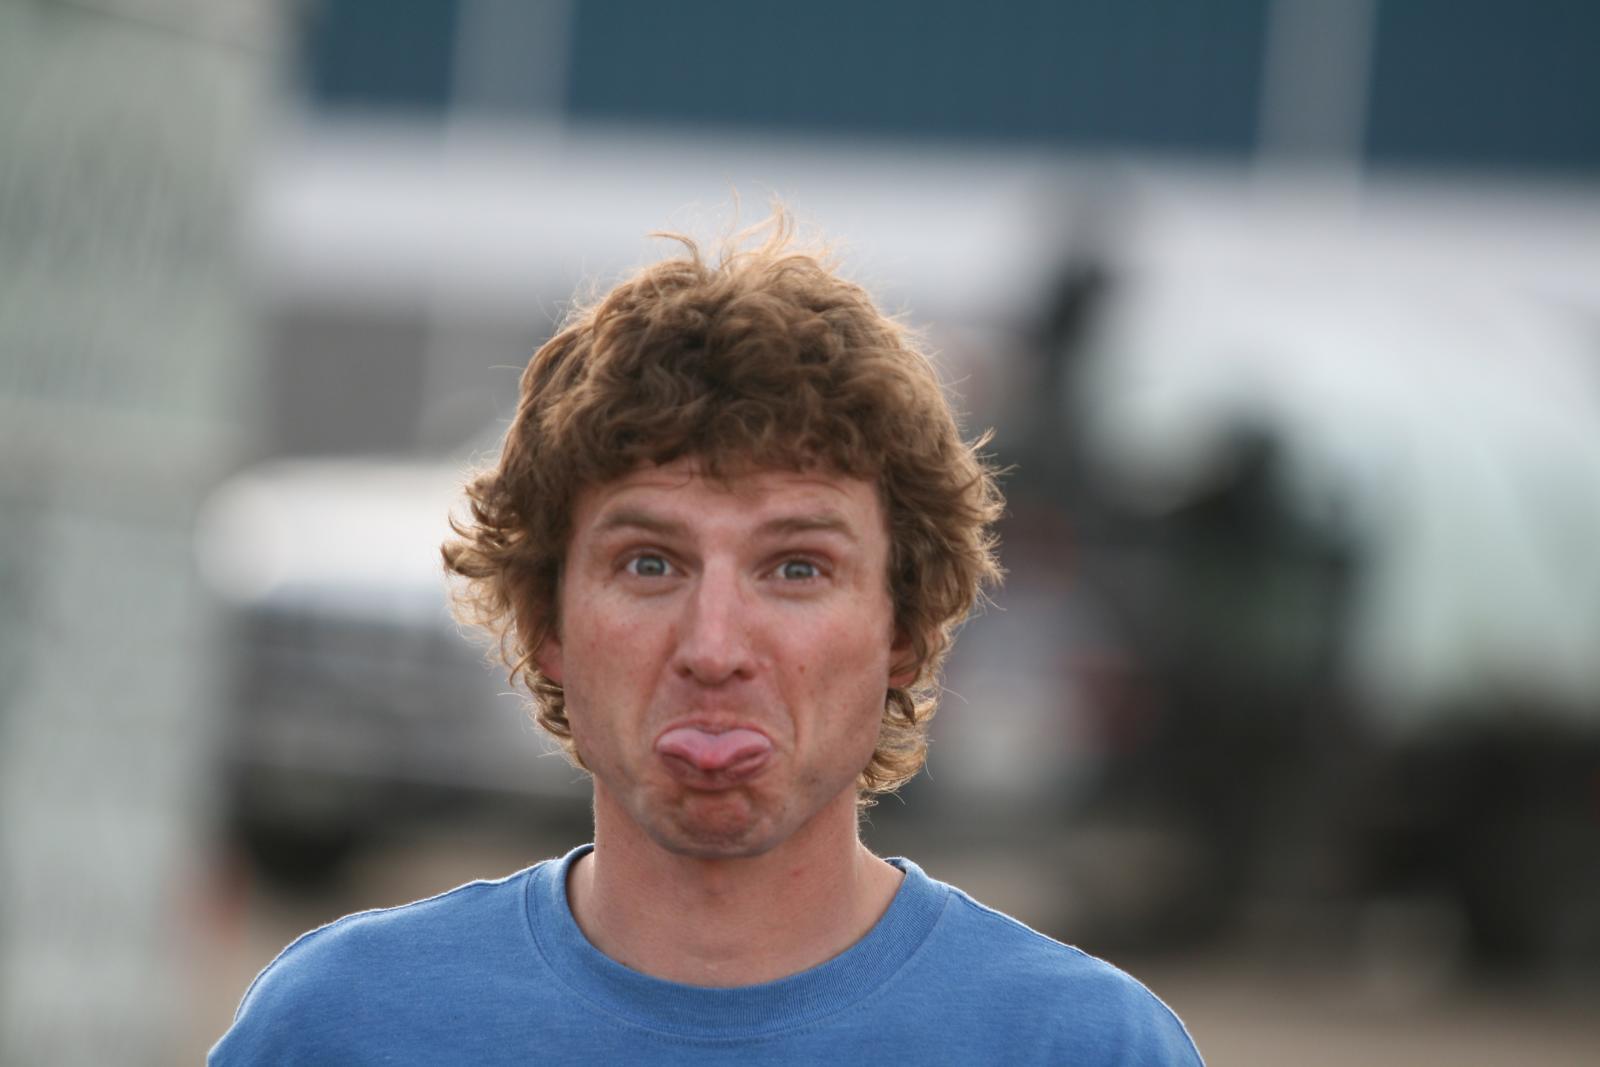 a guy making a funny face and making a face